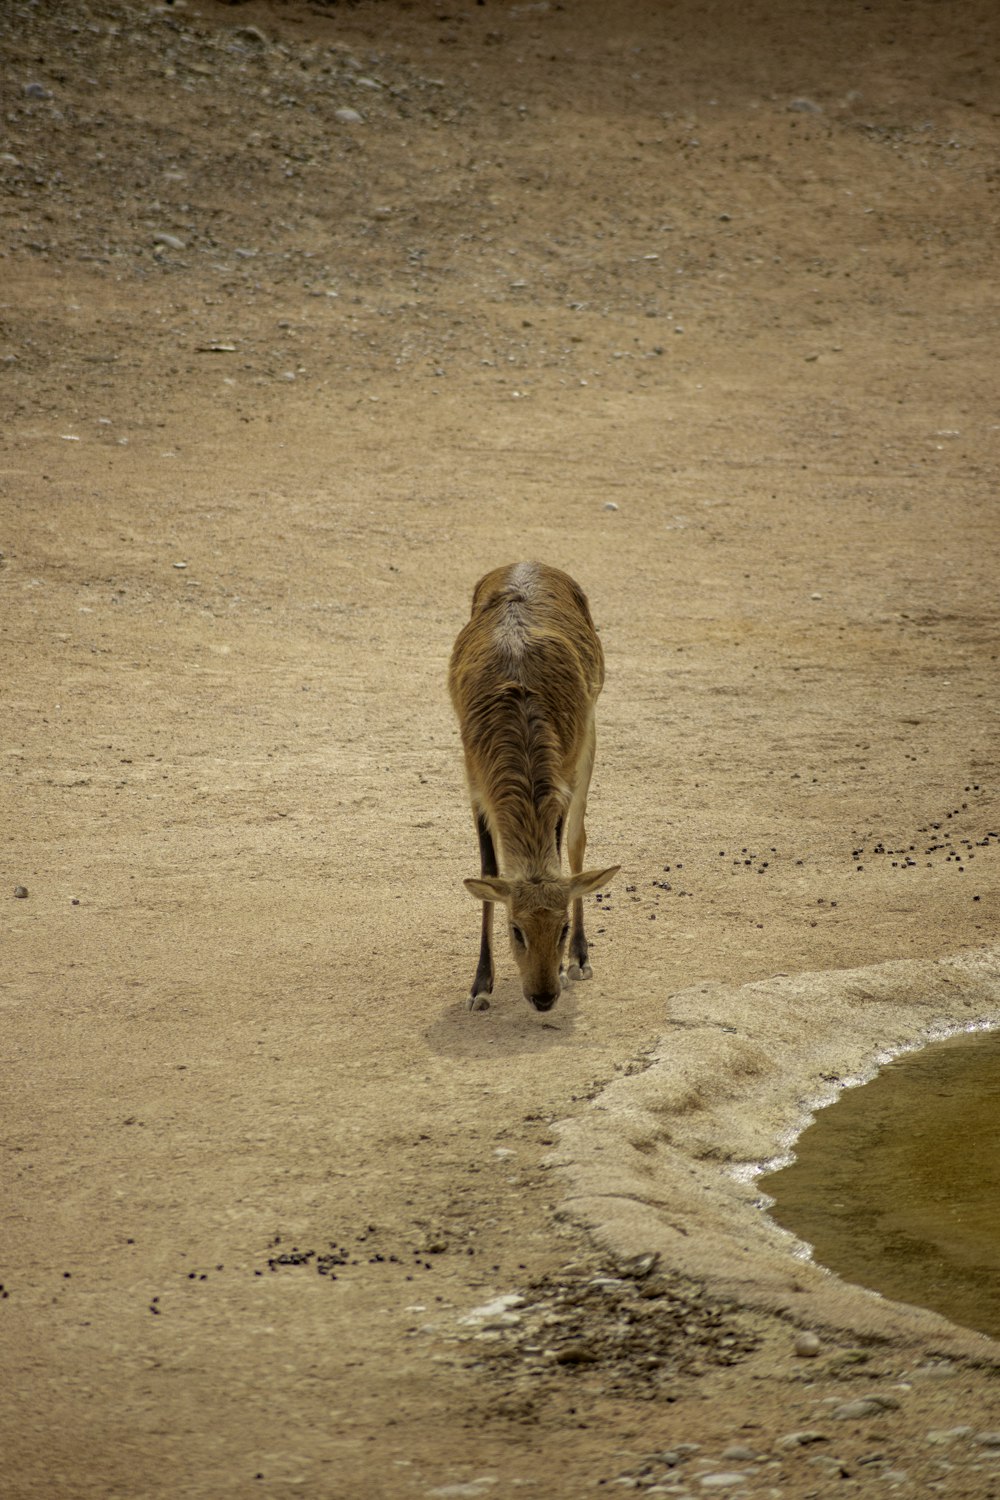 a cow walking across a dirt field next to a body of water